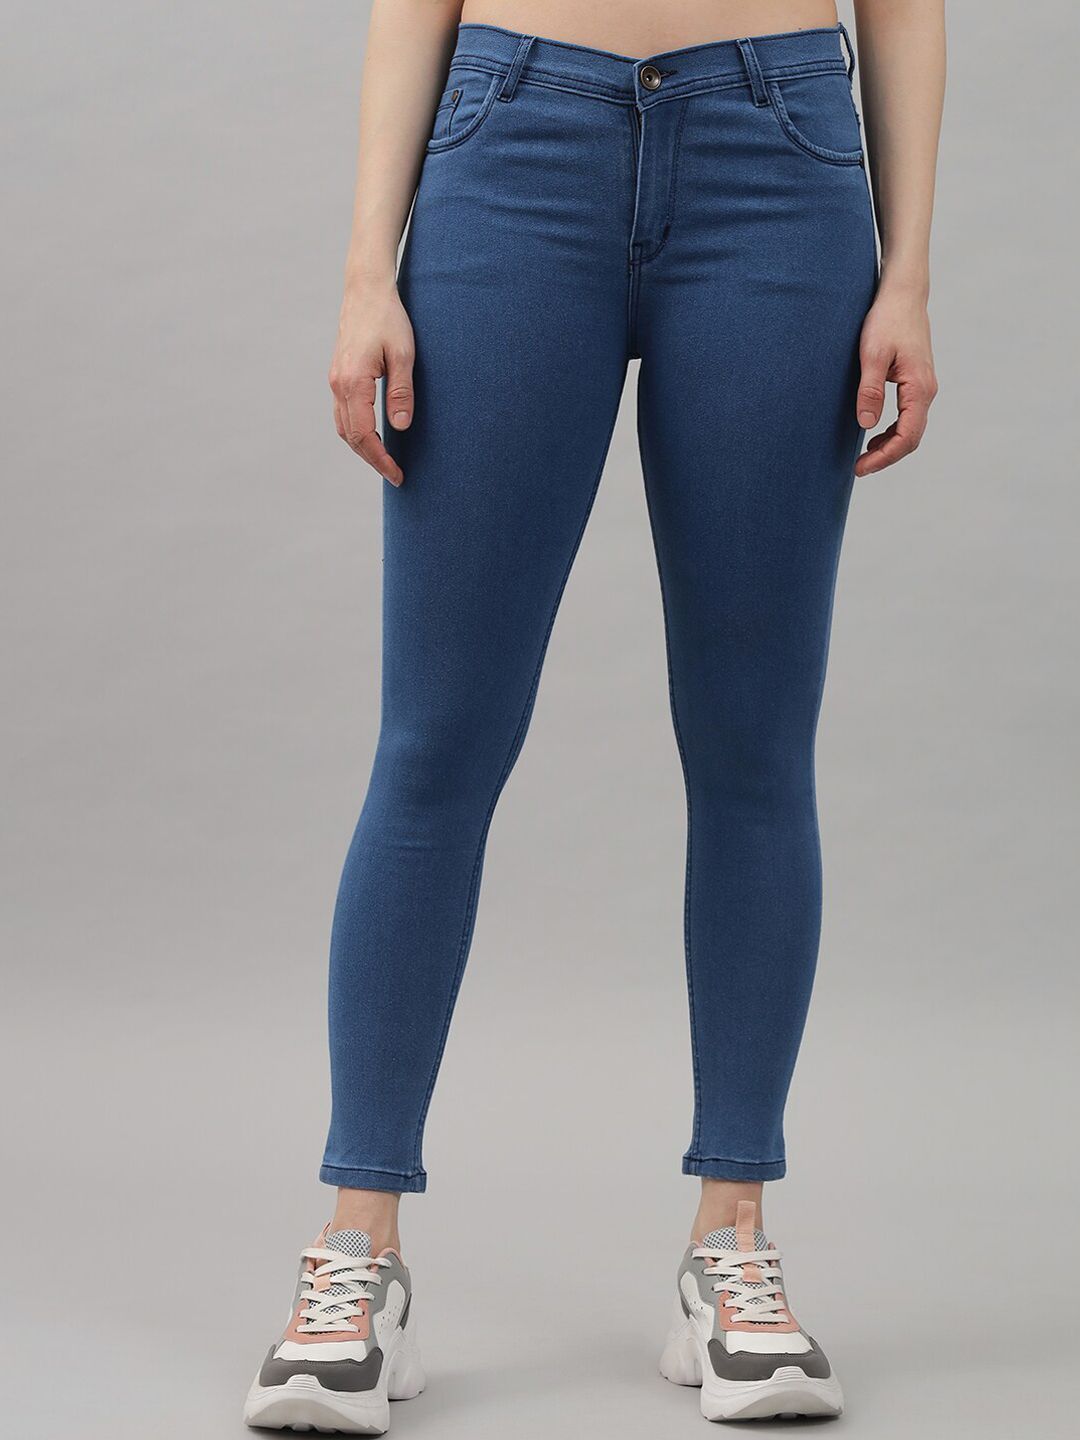 Q-rious Women Blue Slim Fit Stretchable Jeans Price in India